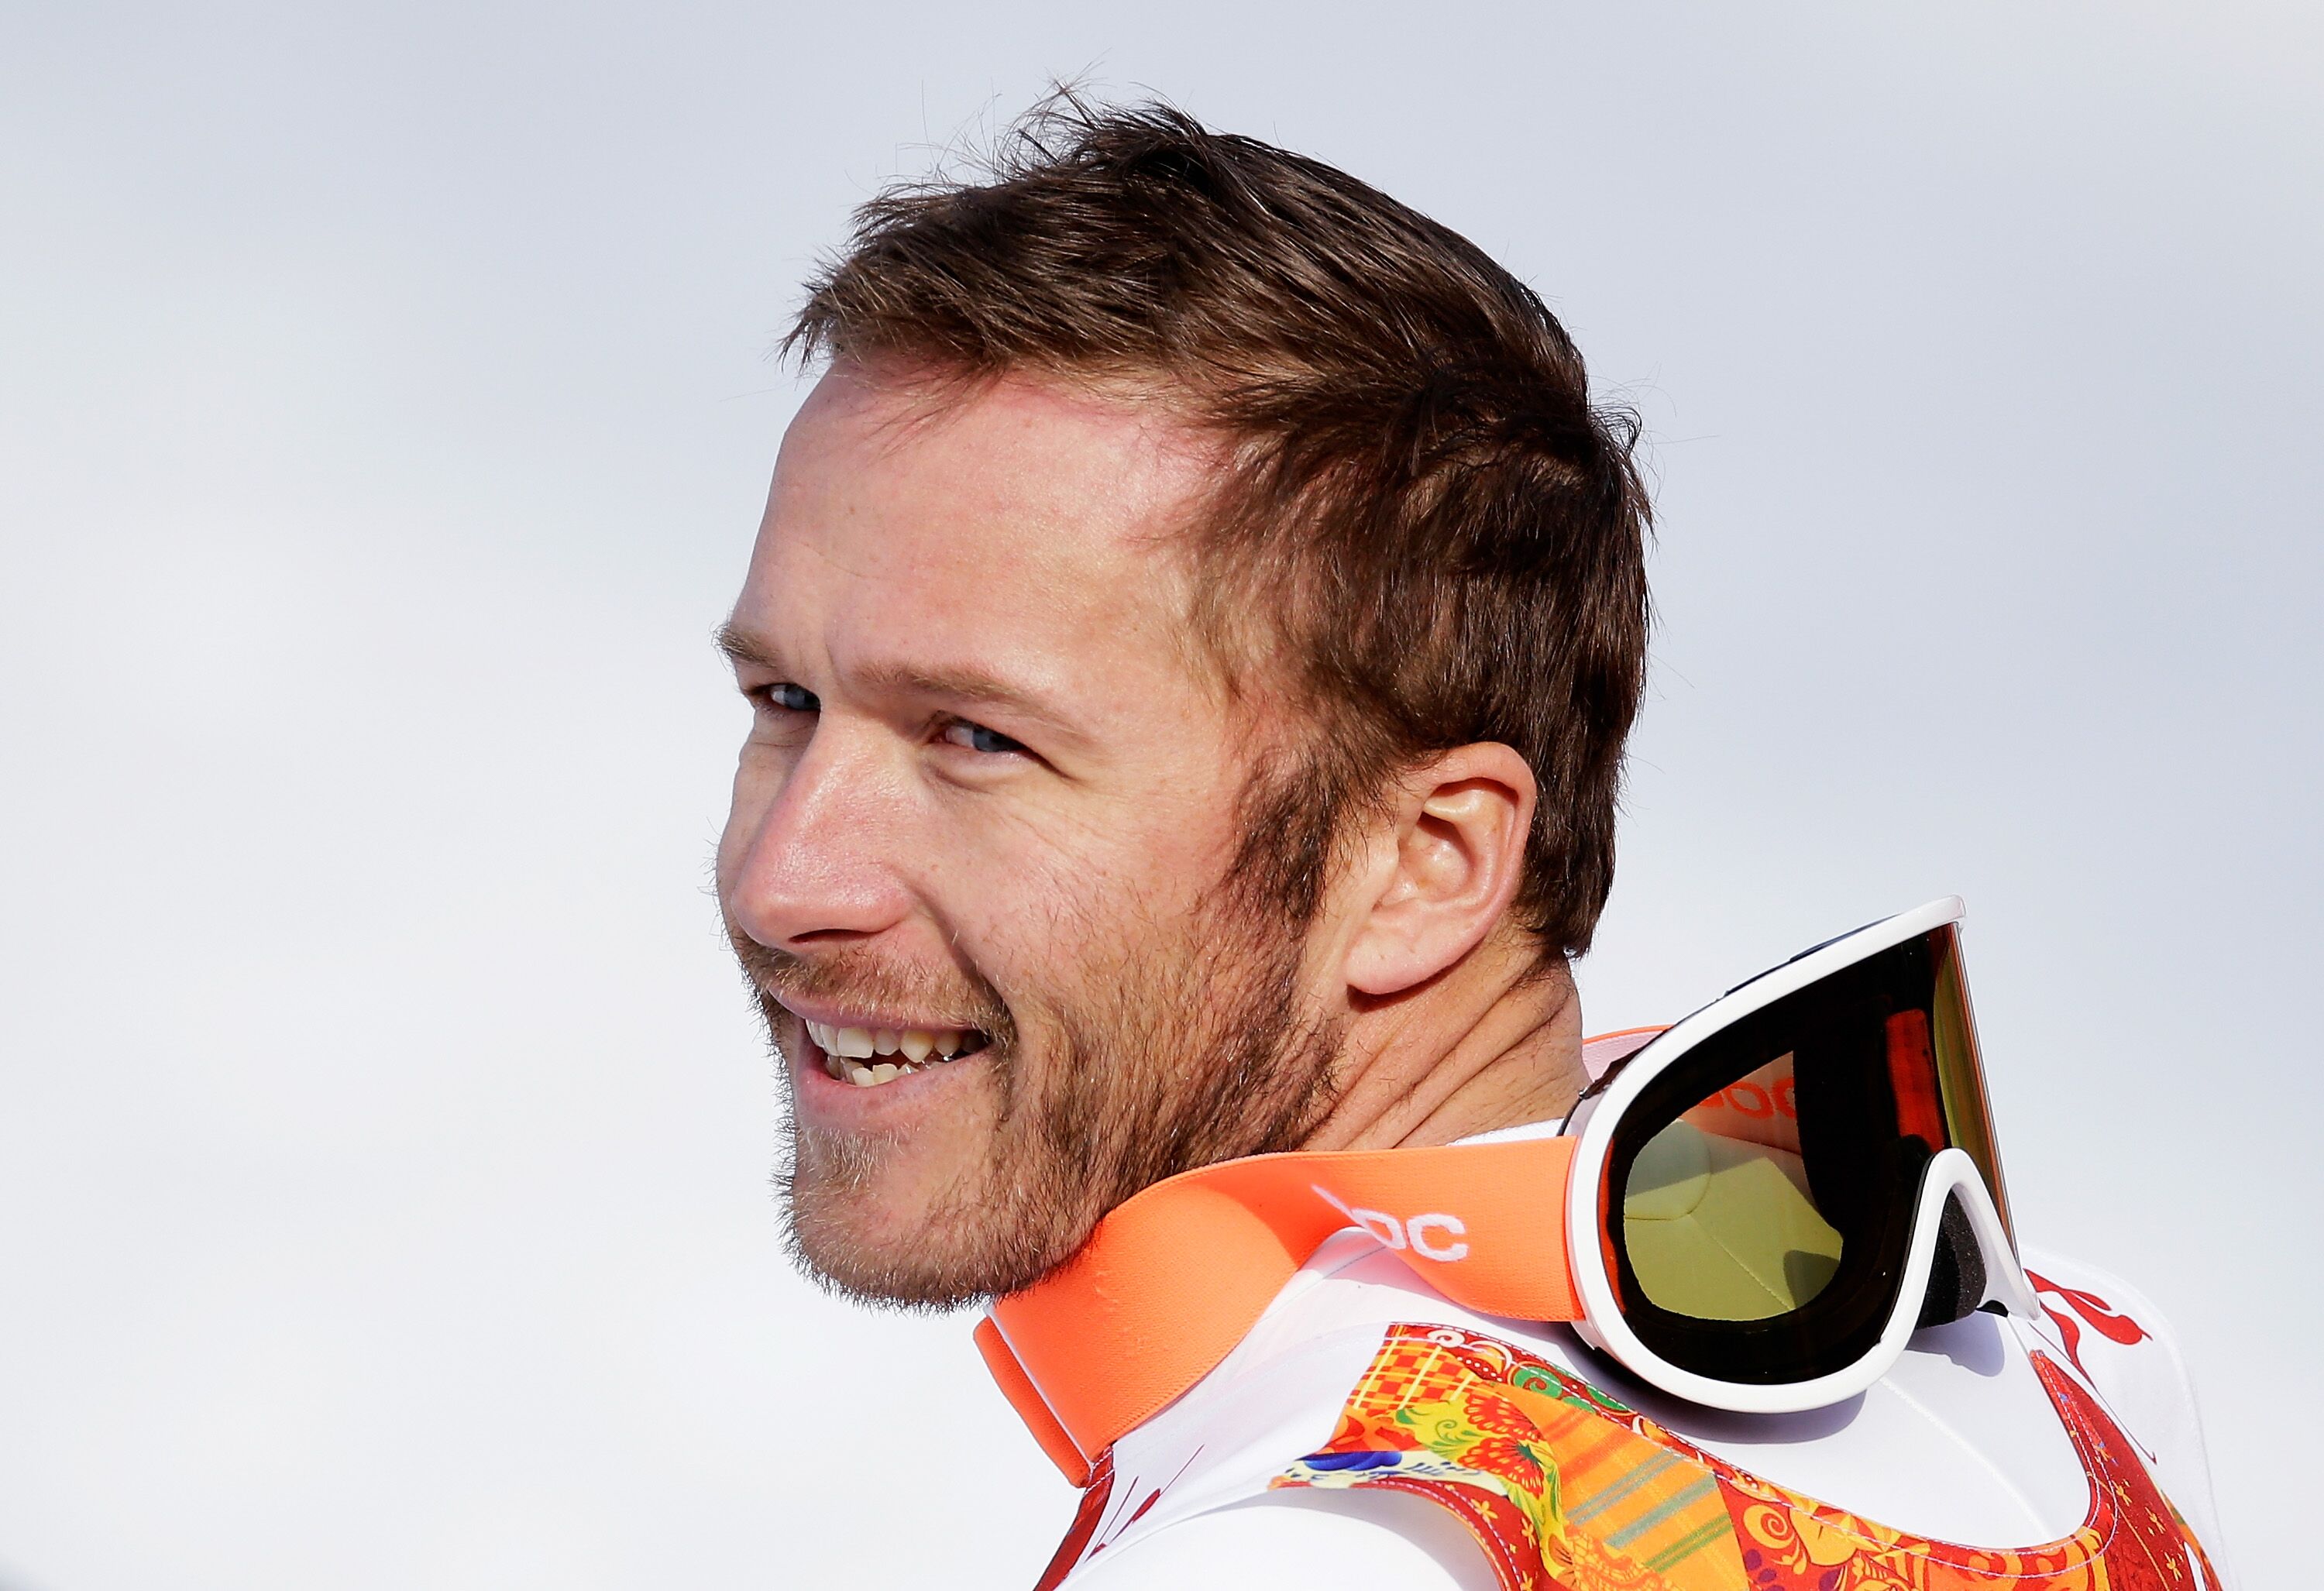 Bode Miller at the Sochi Winter Olympics. | Source: Getty Images